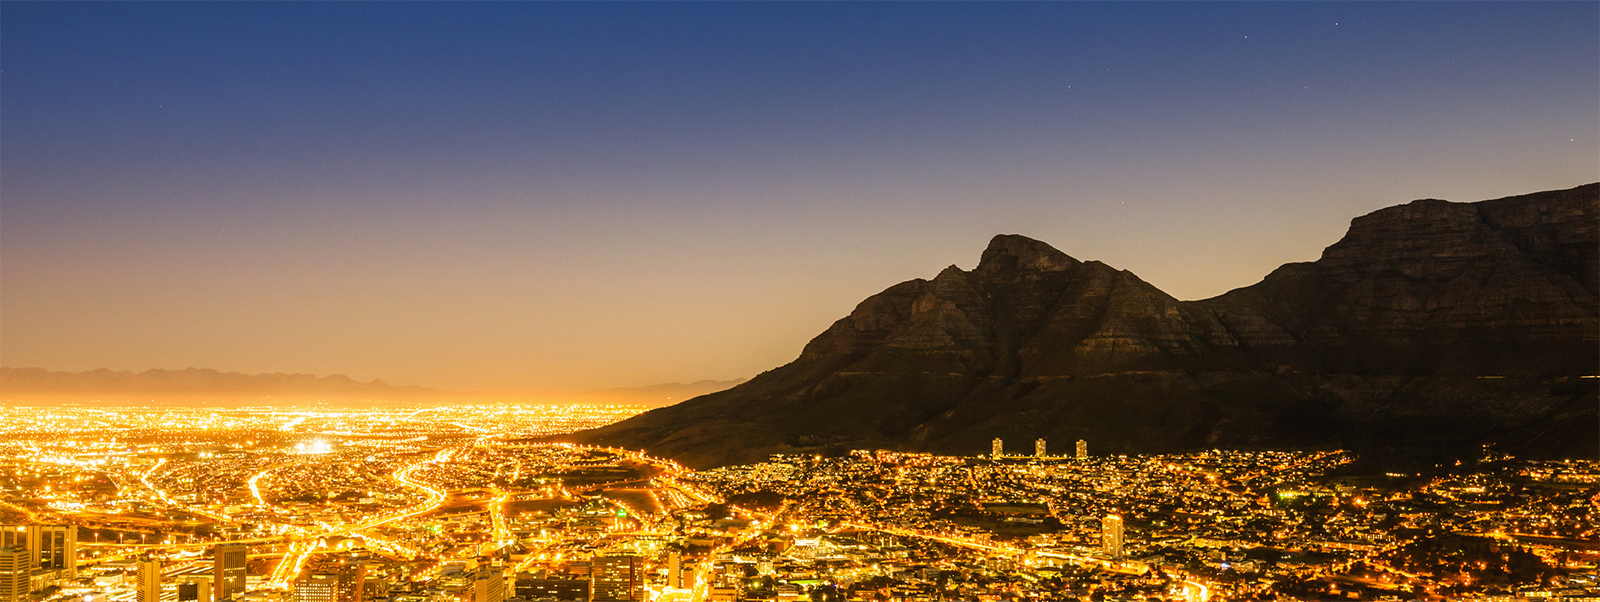 Digitalization In Financial Services In South Africa